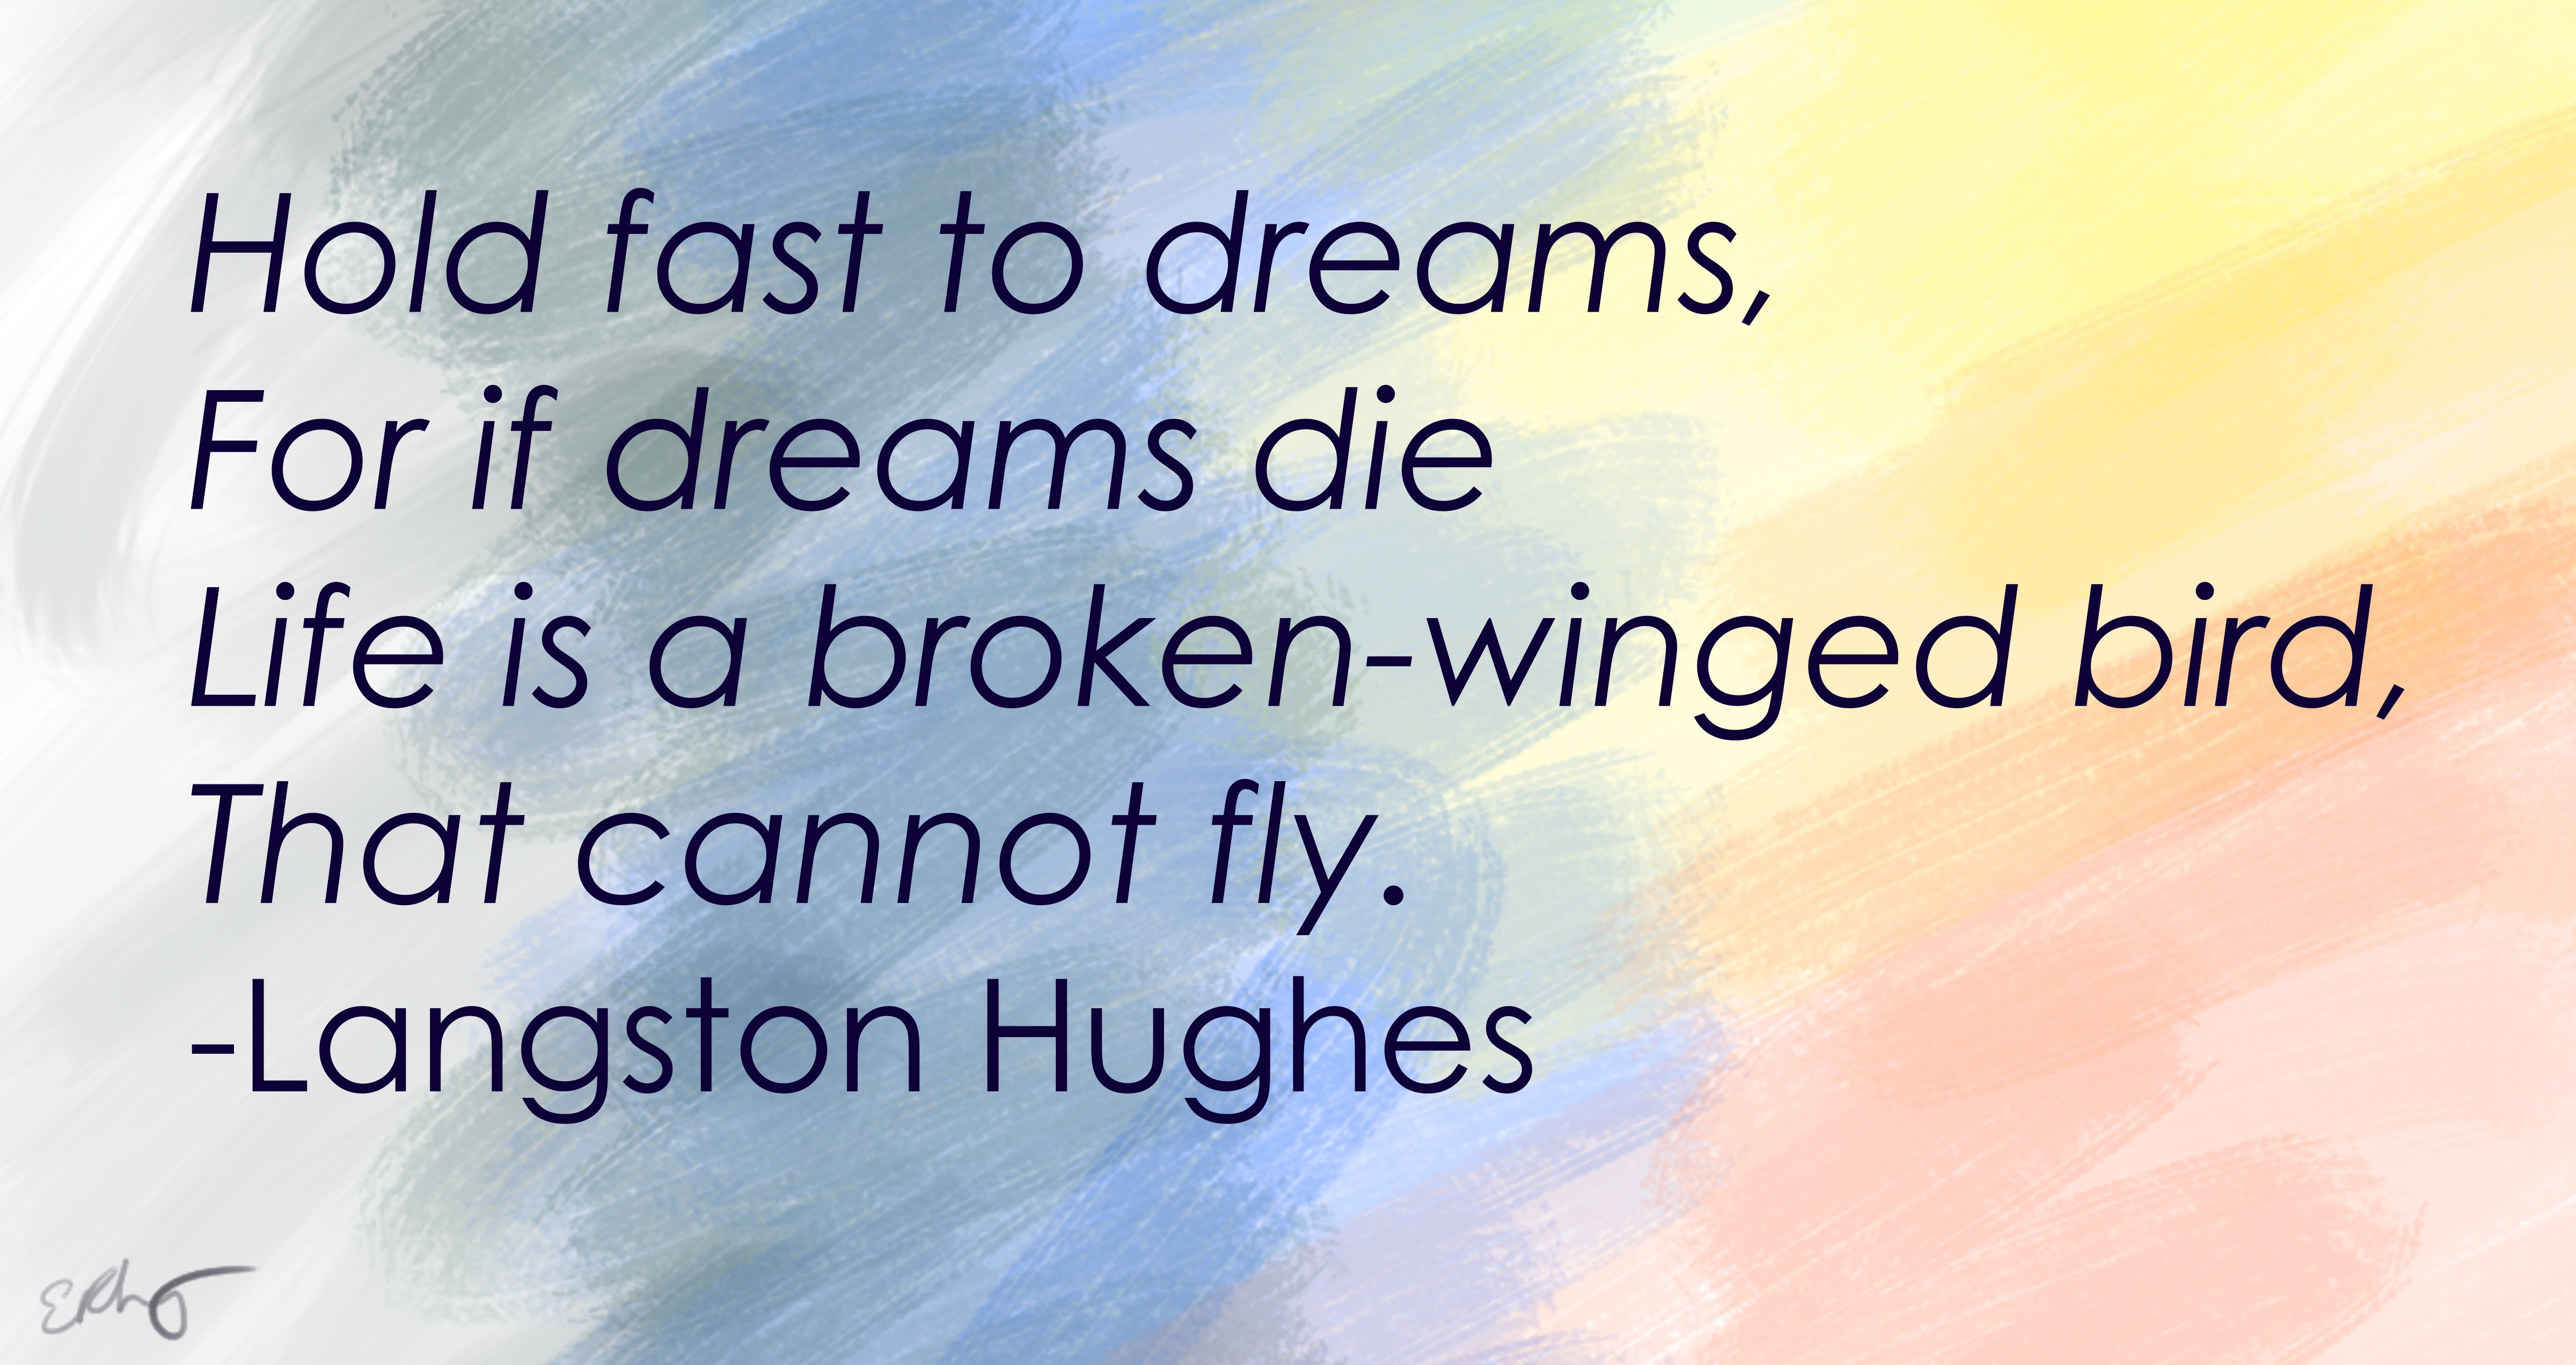 Quote from Langston Hughes: Hold fast to dreams, for if dreams die life is a broken-winged bird, that cannot fly.